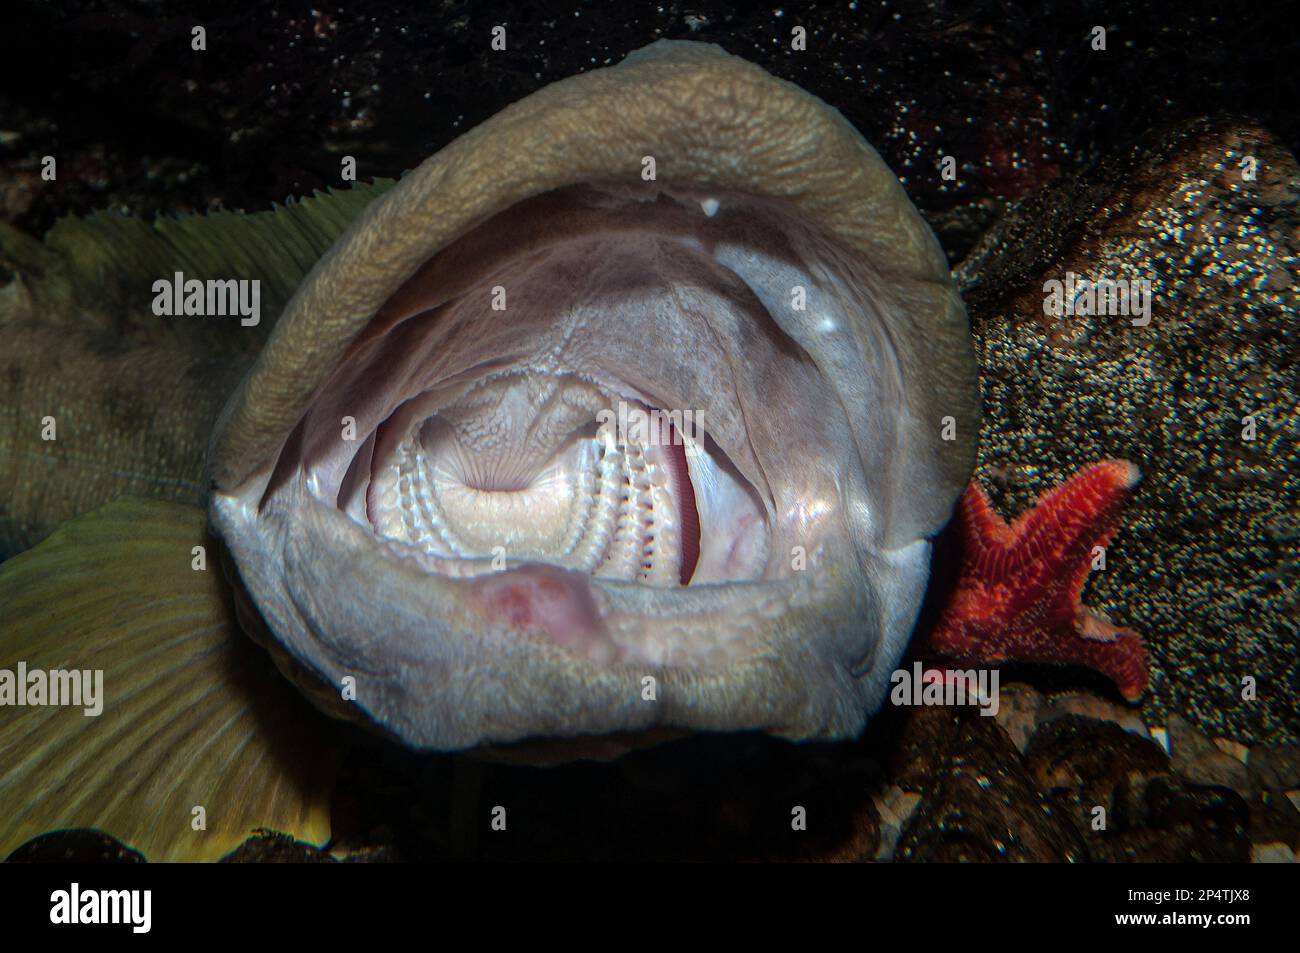 Ocean Pout mouth open wide close-up Stock Photo